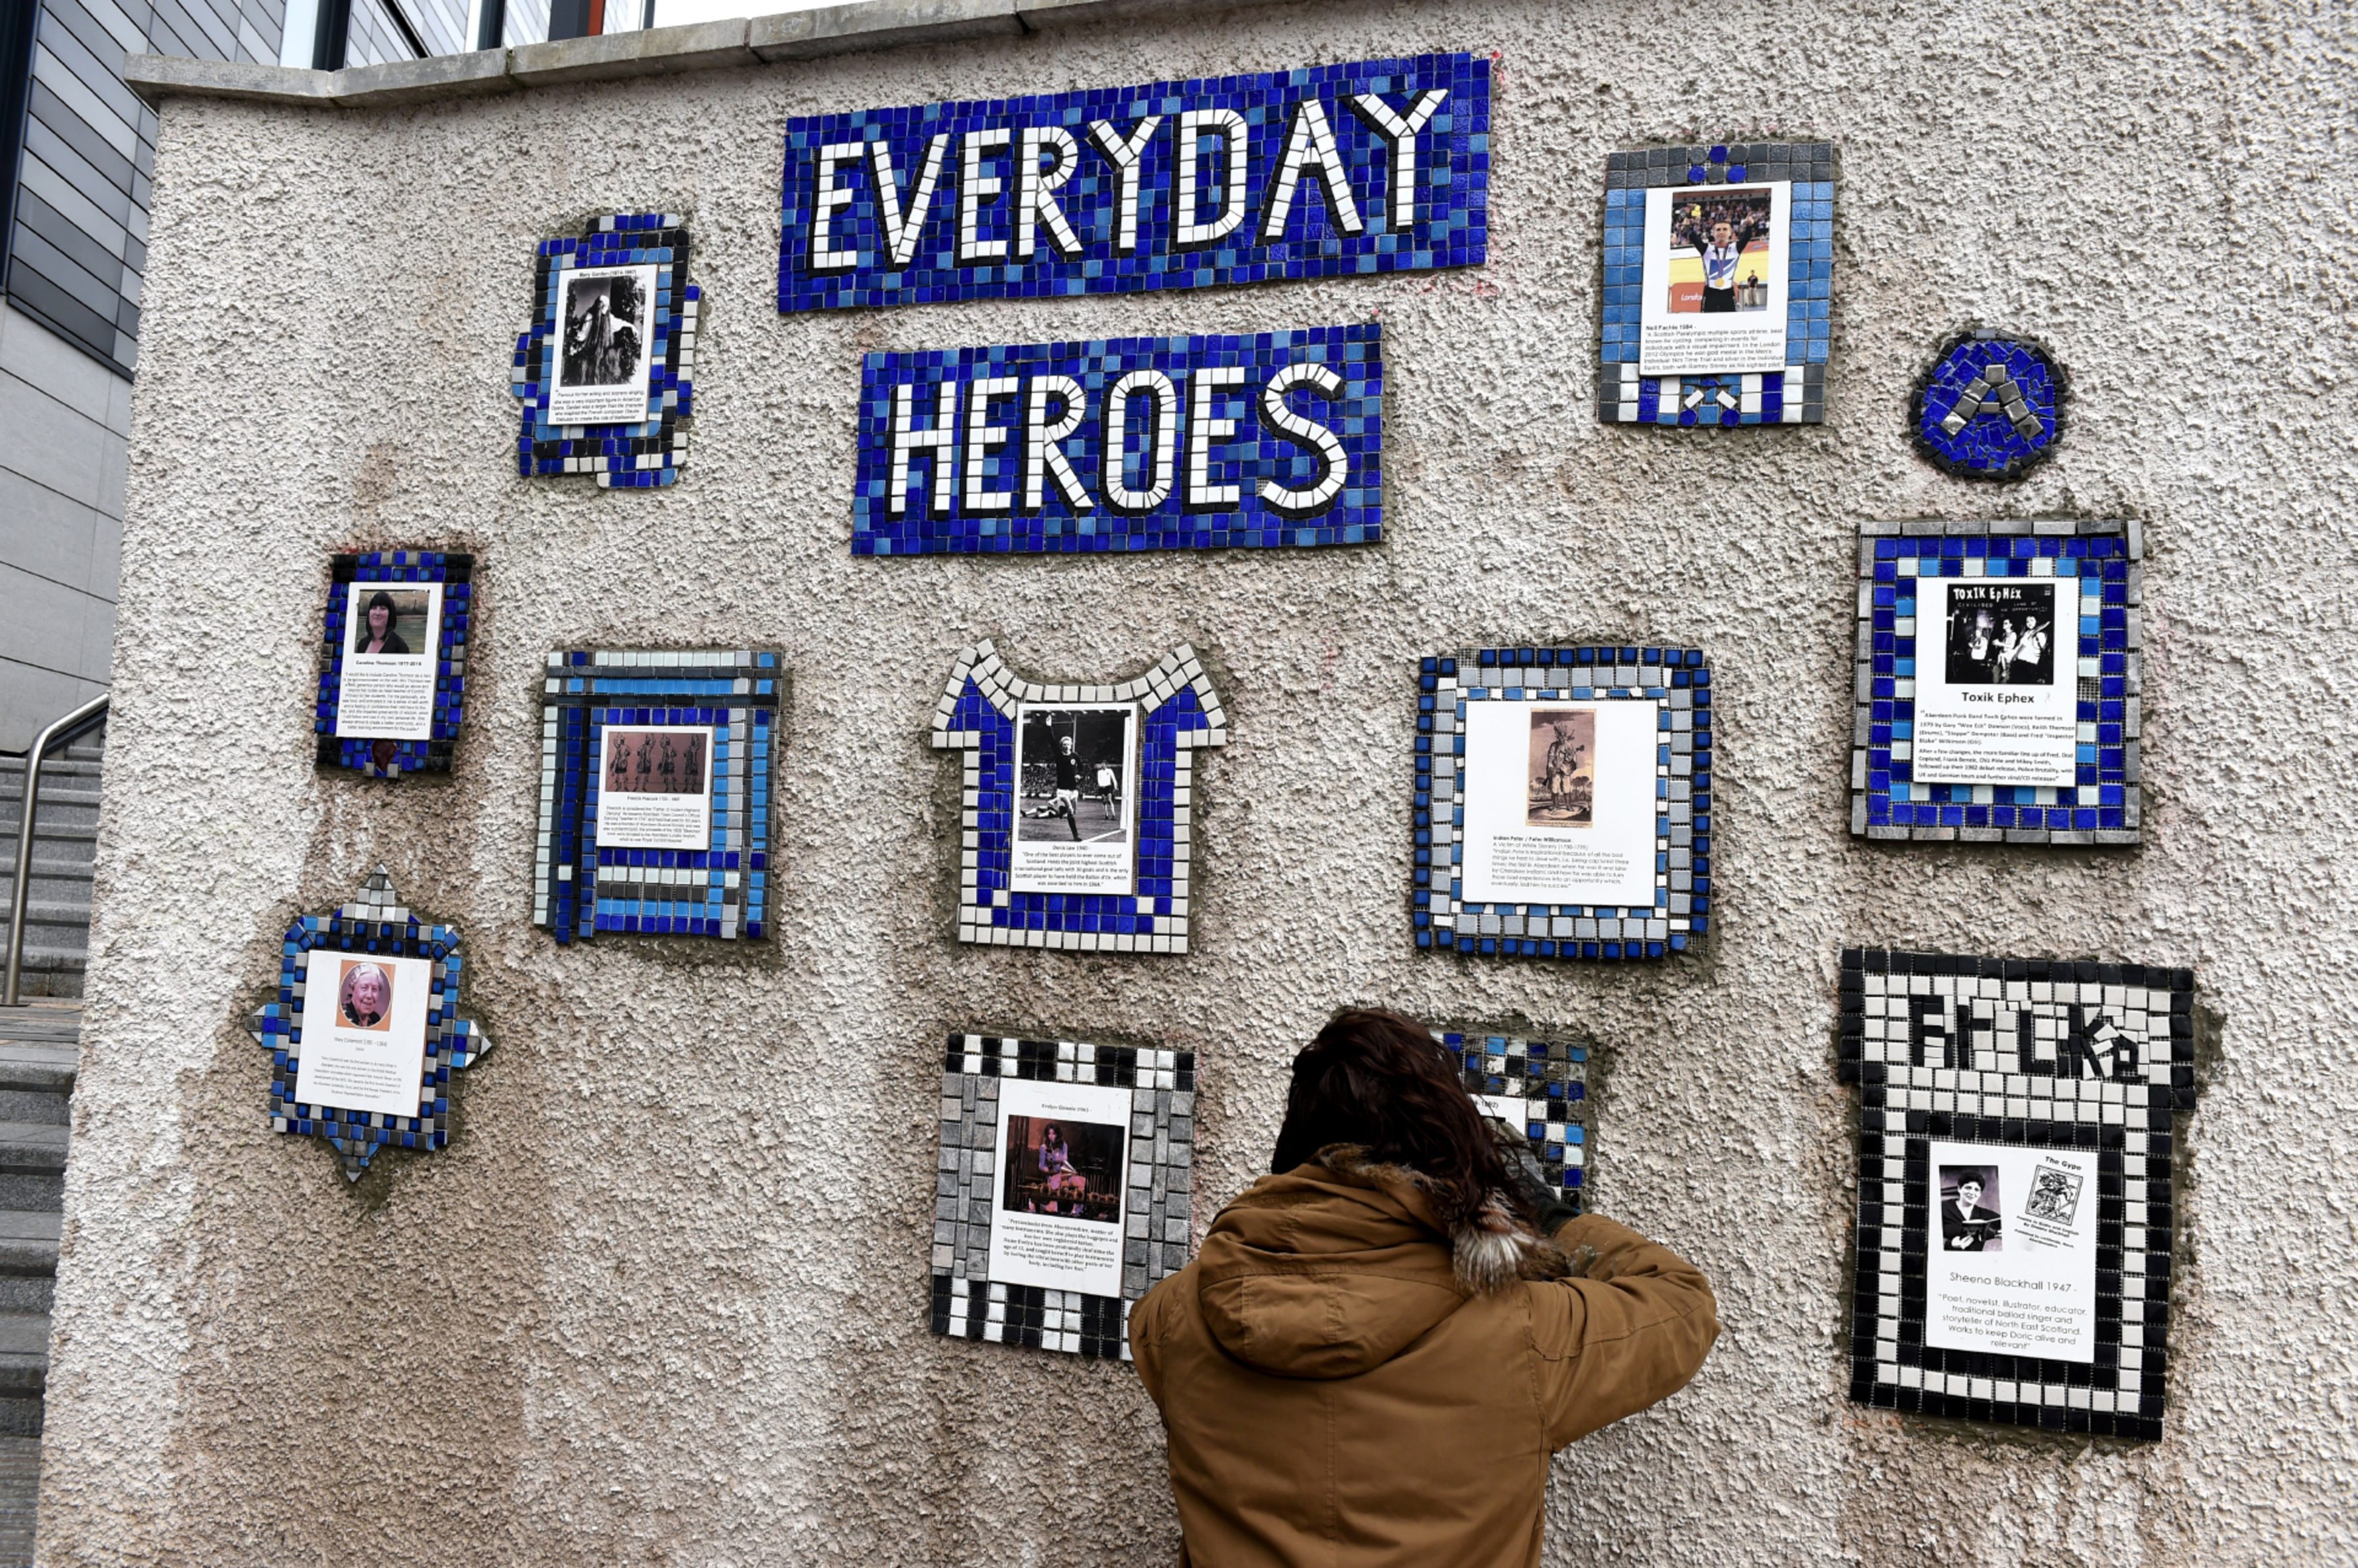 Nuart Aberdeen 2019. Picture of Everyday Heroes on Flourmill Lane, Aberdeen.

Picture by KENNY ELRICK